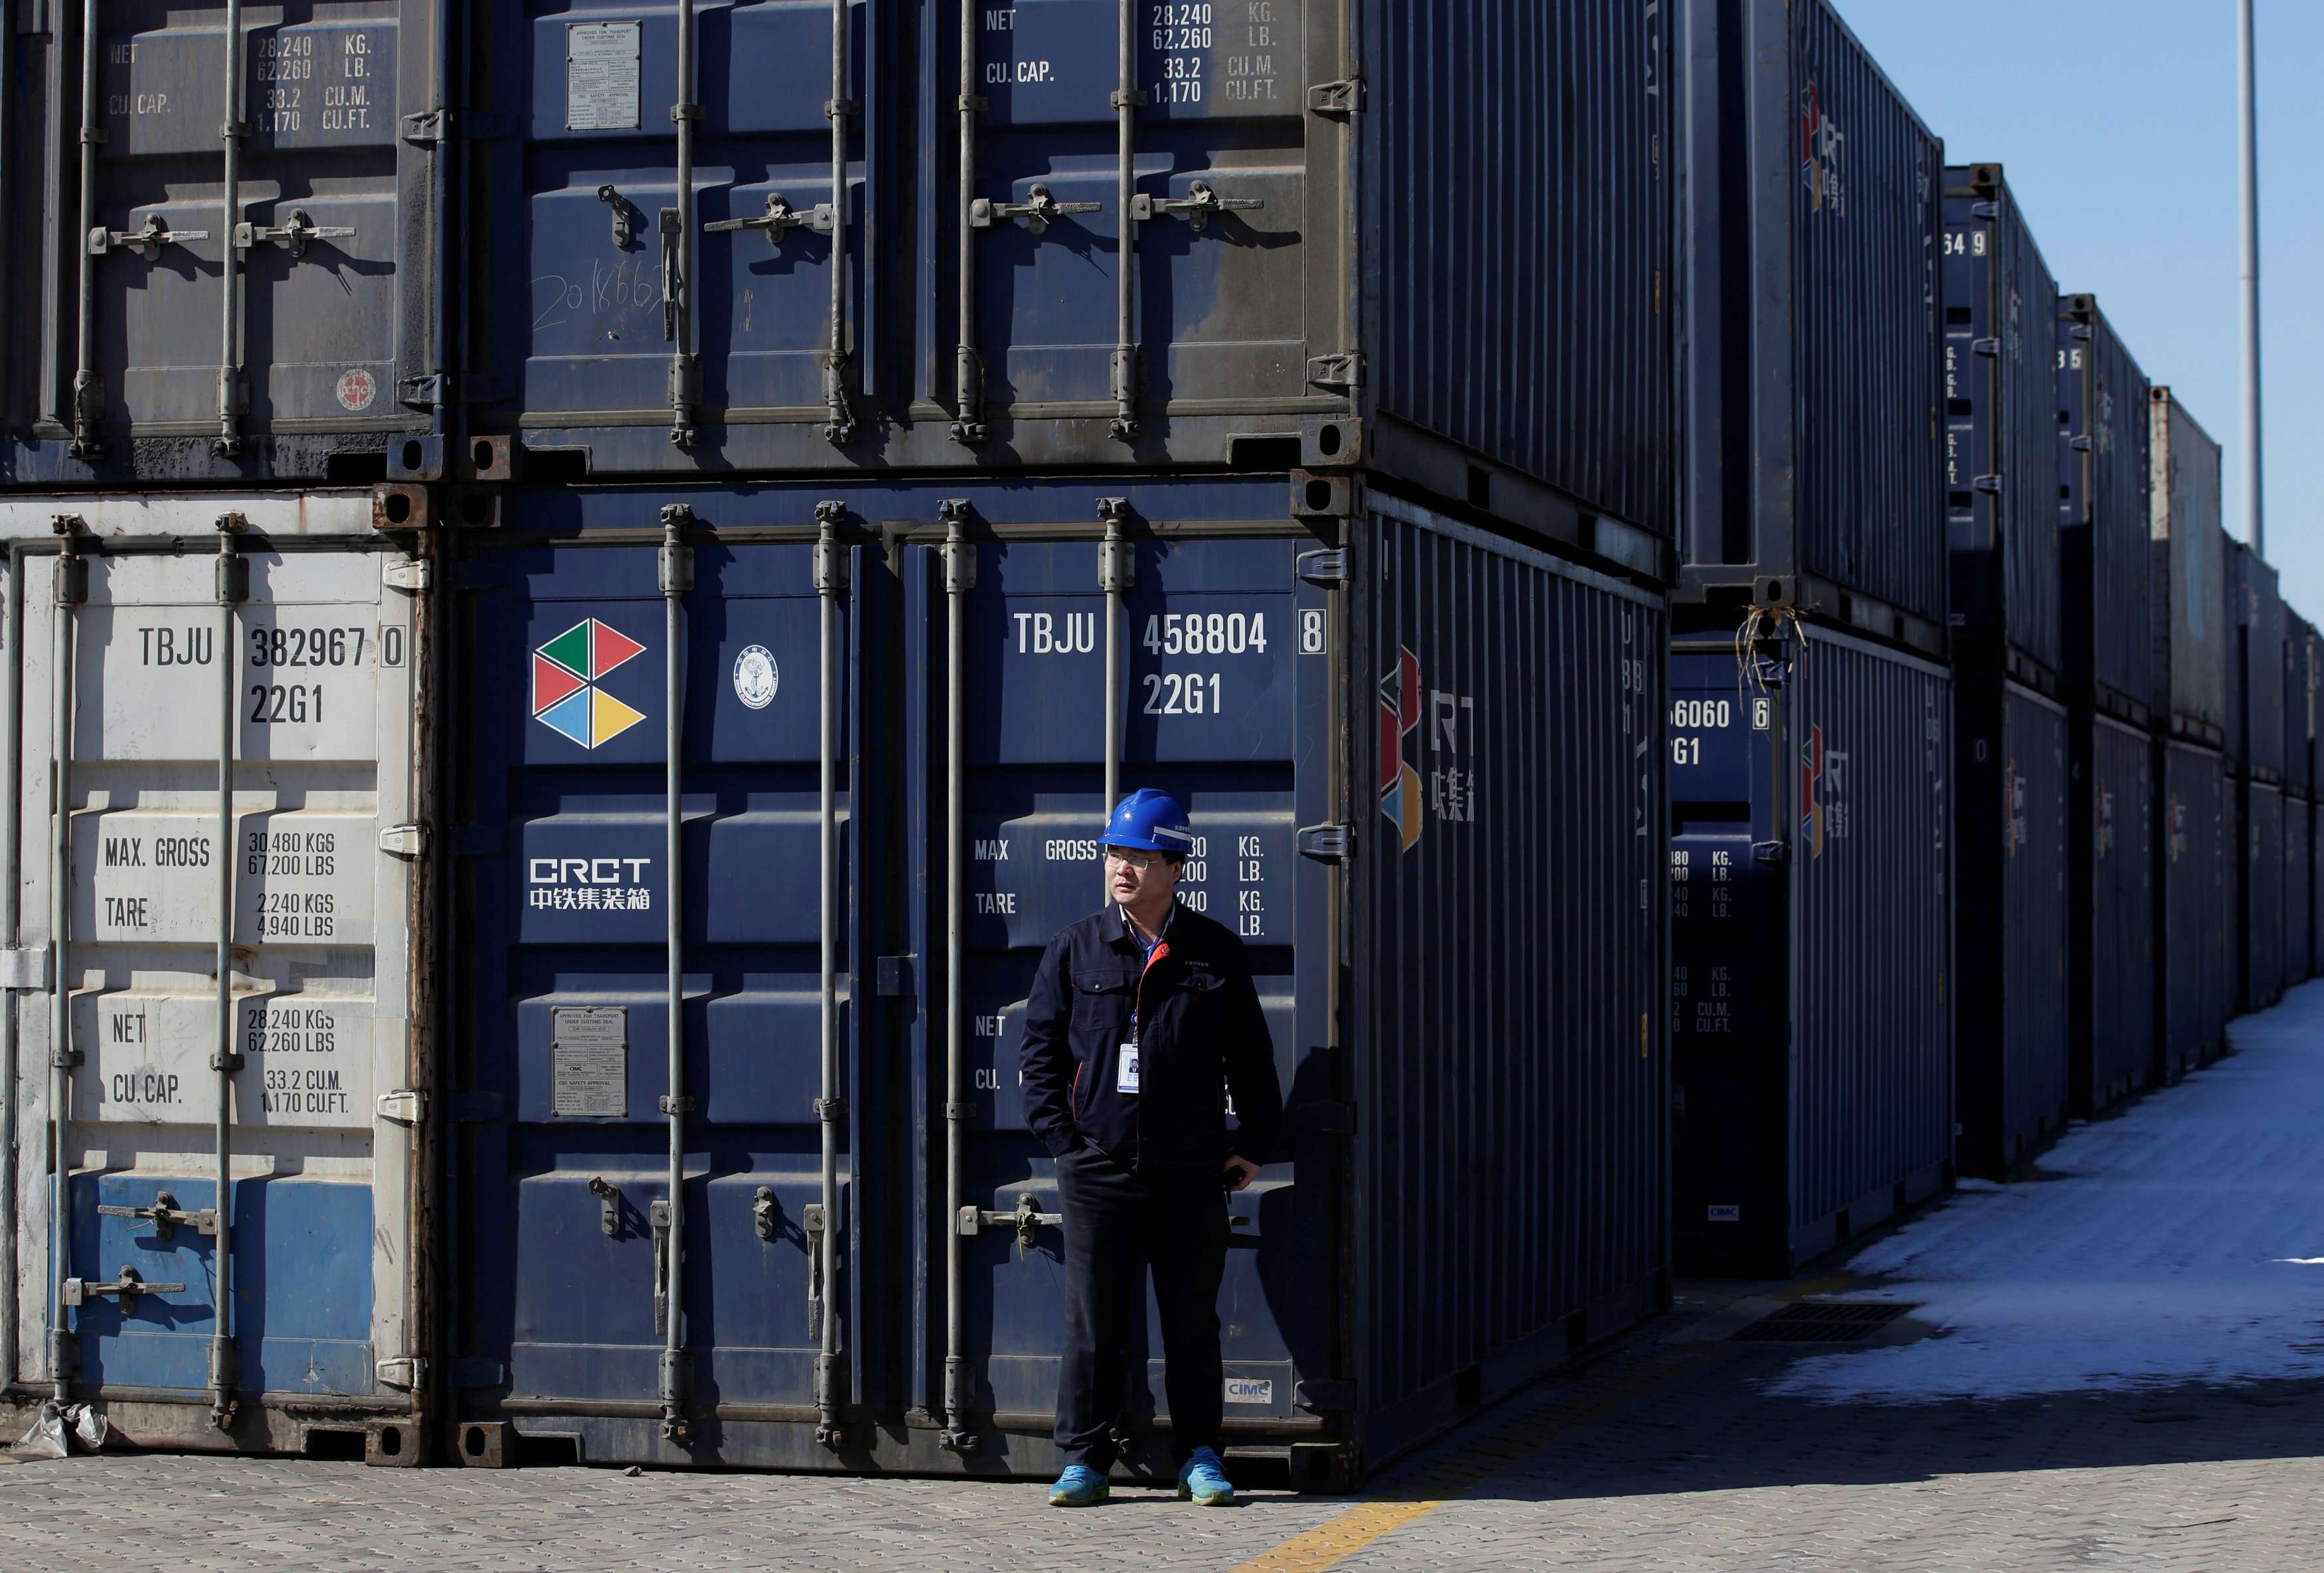 Containers wait to be transported near Tianjin port in northern China in February. China, the world’s largest exporter, has seen shipments fall and could face more challenges once a proposed US border adjustment tax or threatened tariffs take effect. Photo: Reuters